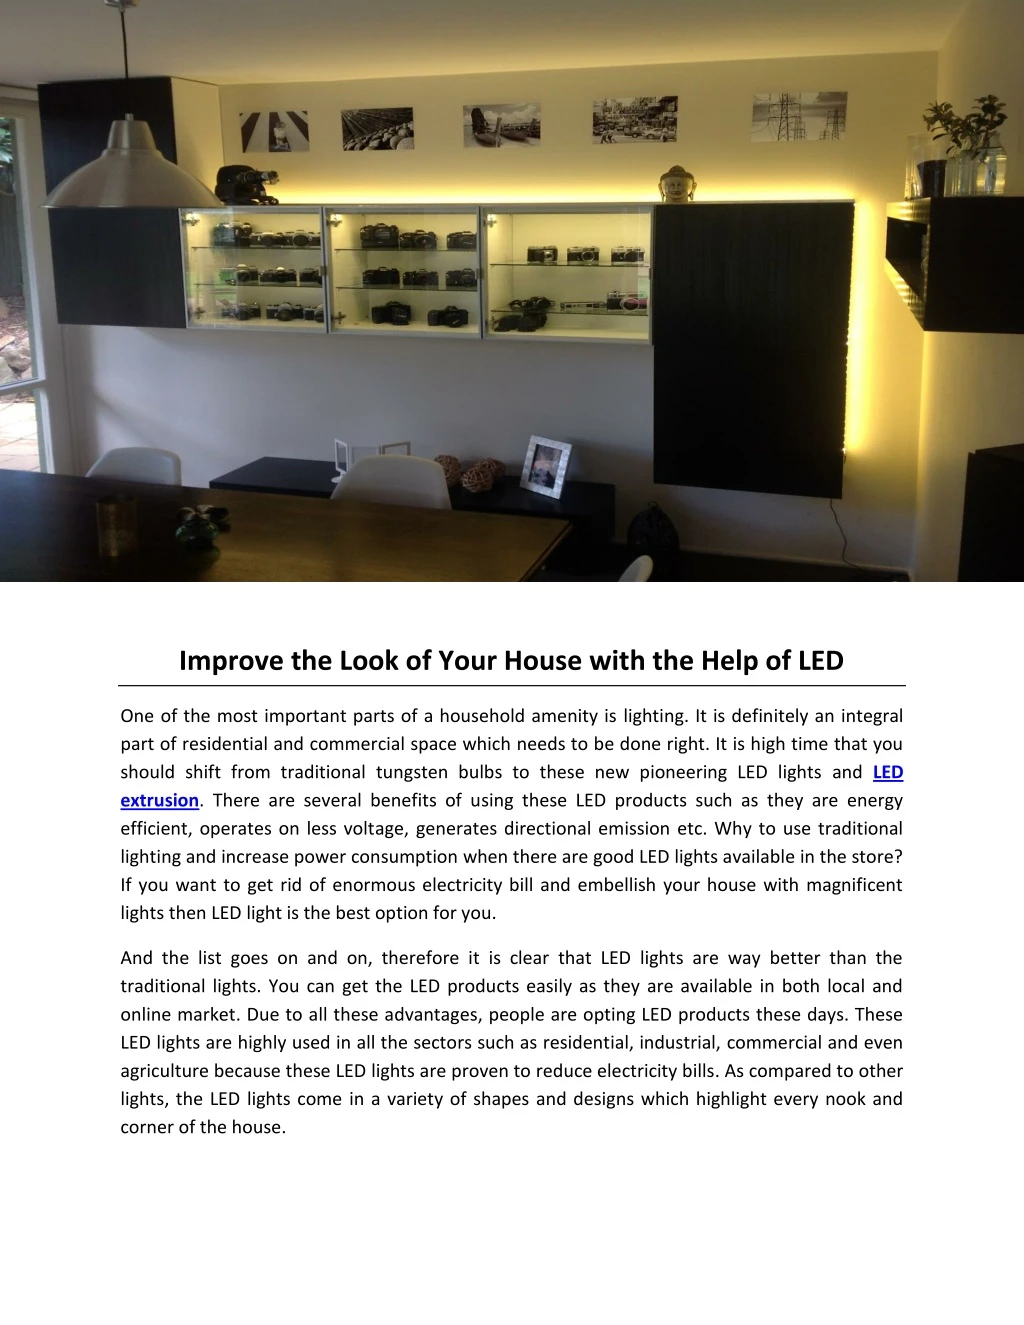 improve the look of your house with the help